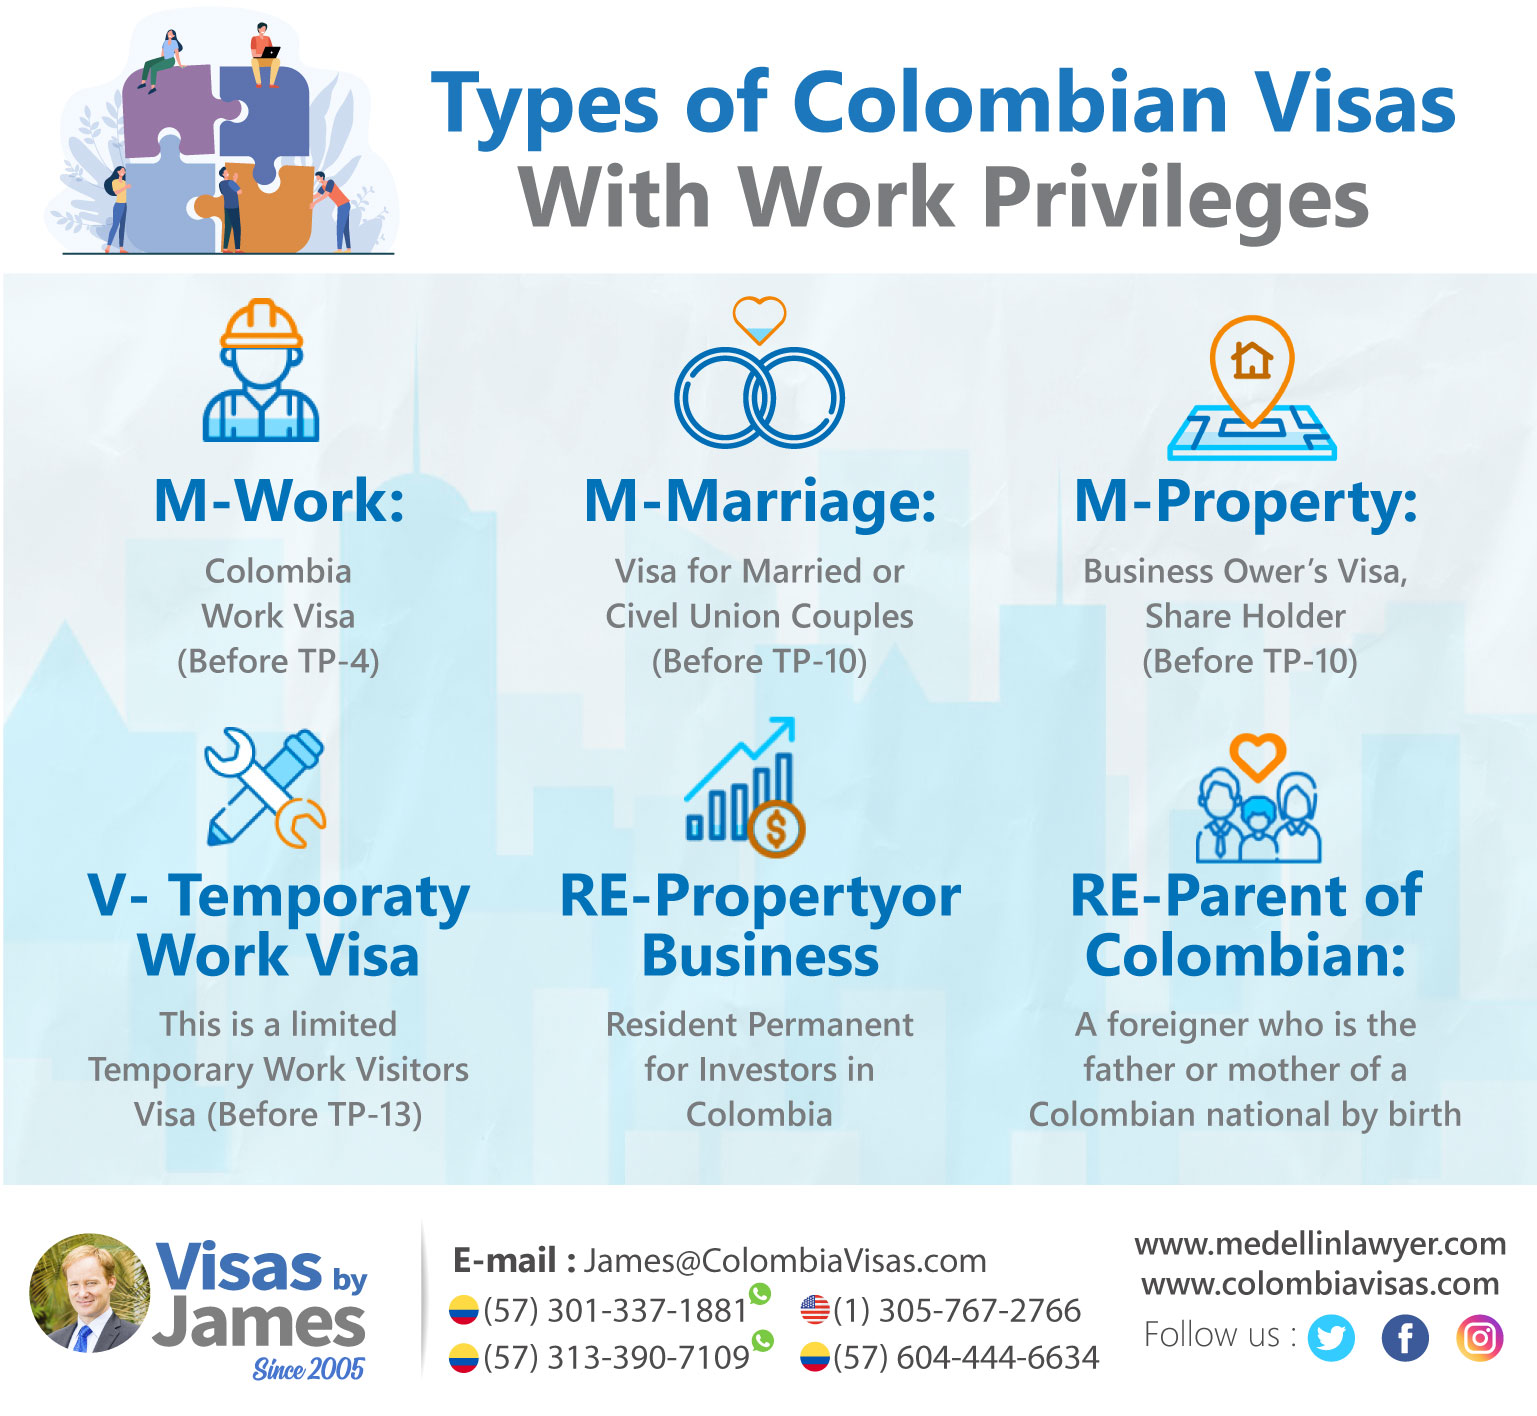 Types-of-Colombian-Visas-With-Work